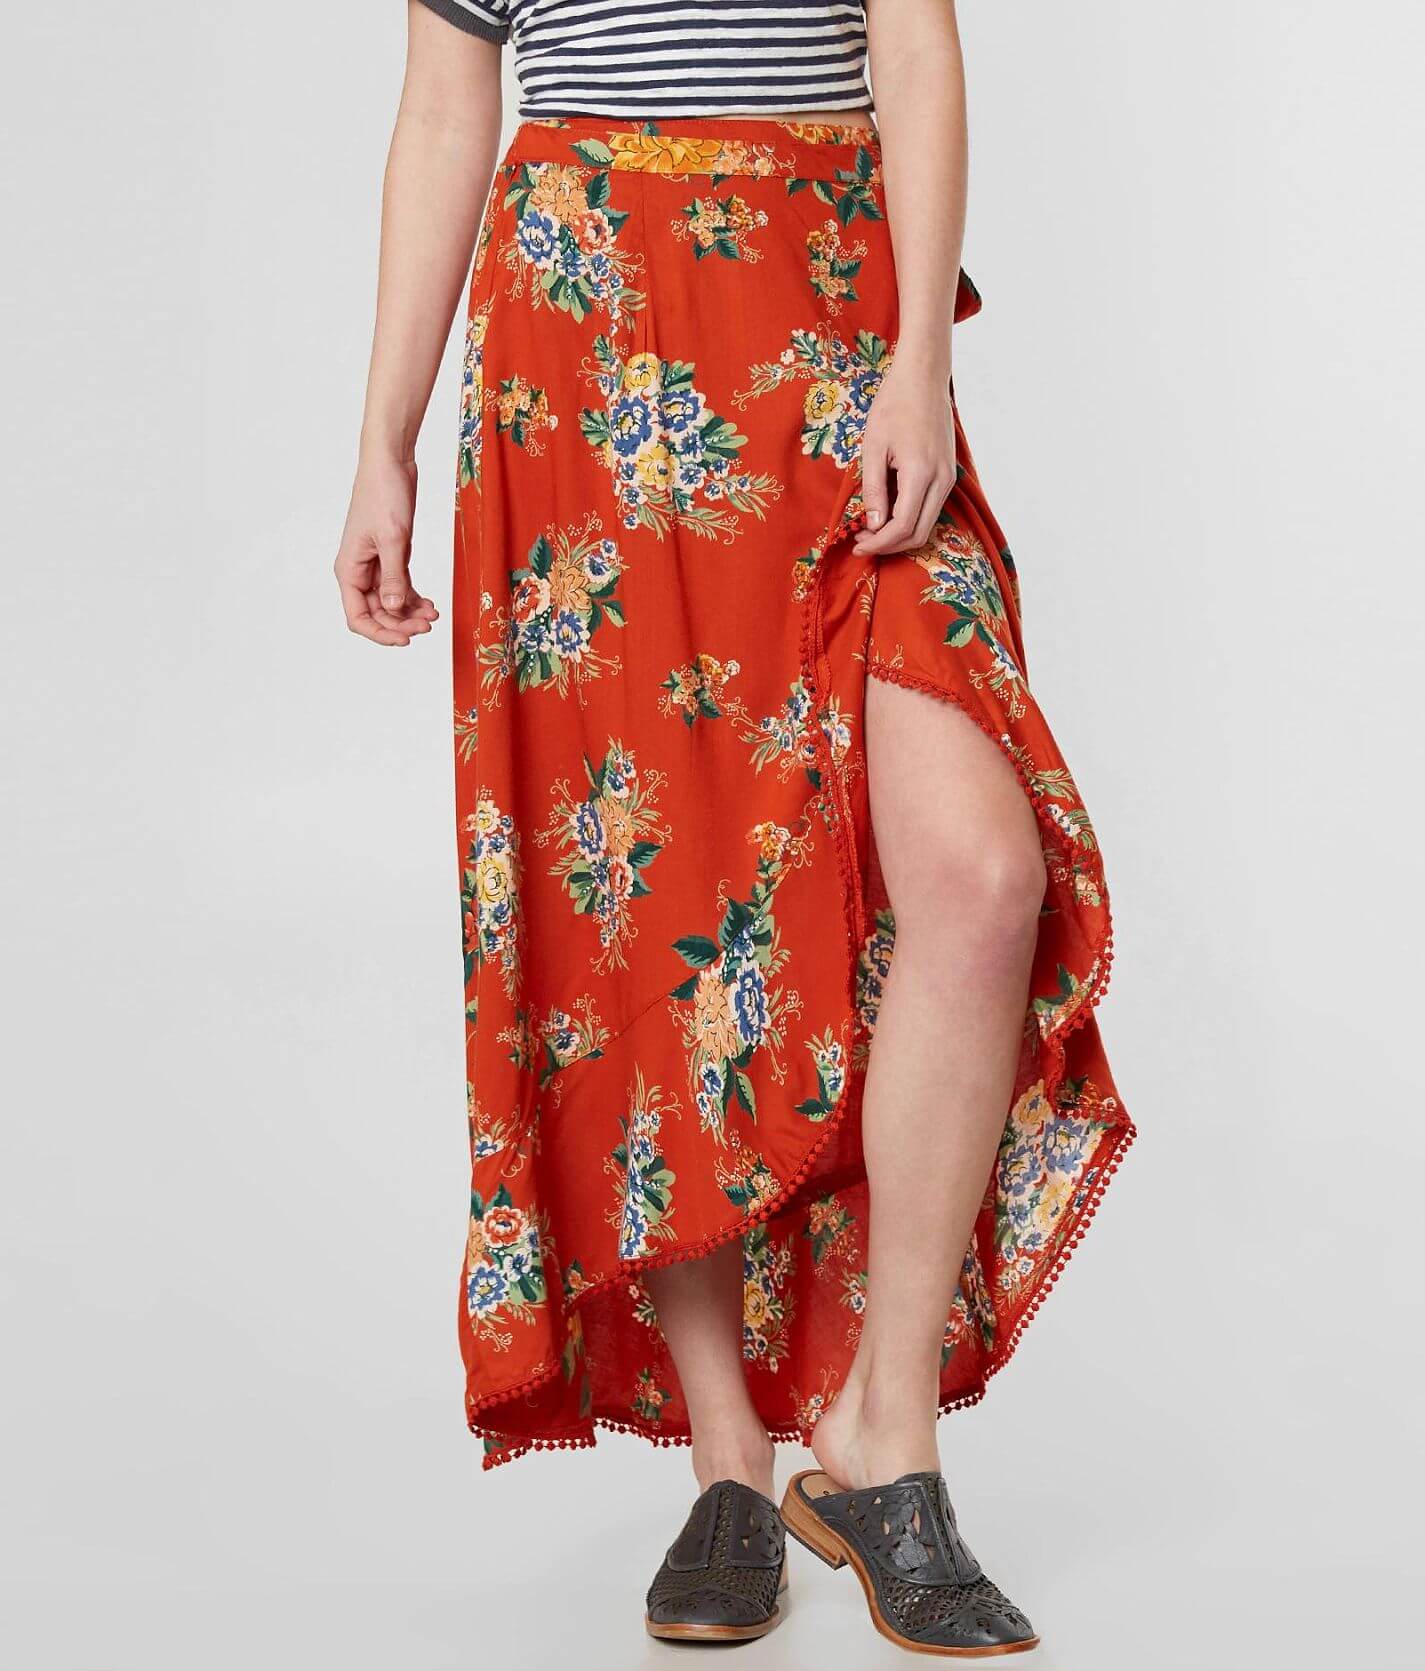 Angie Floral Wrap Maxi Skirt - Women's Skirts in Orange | Buckle